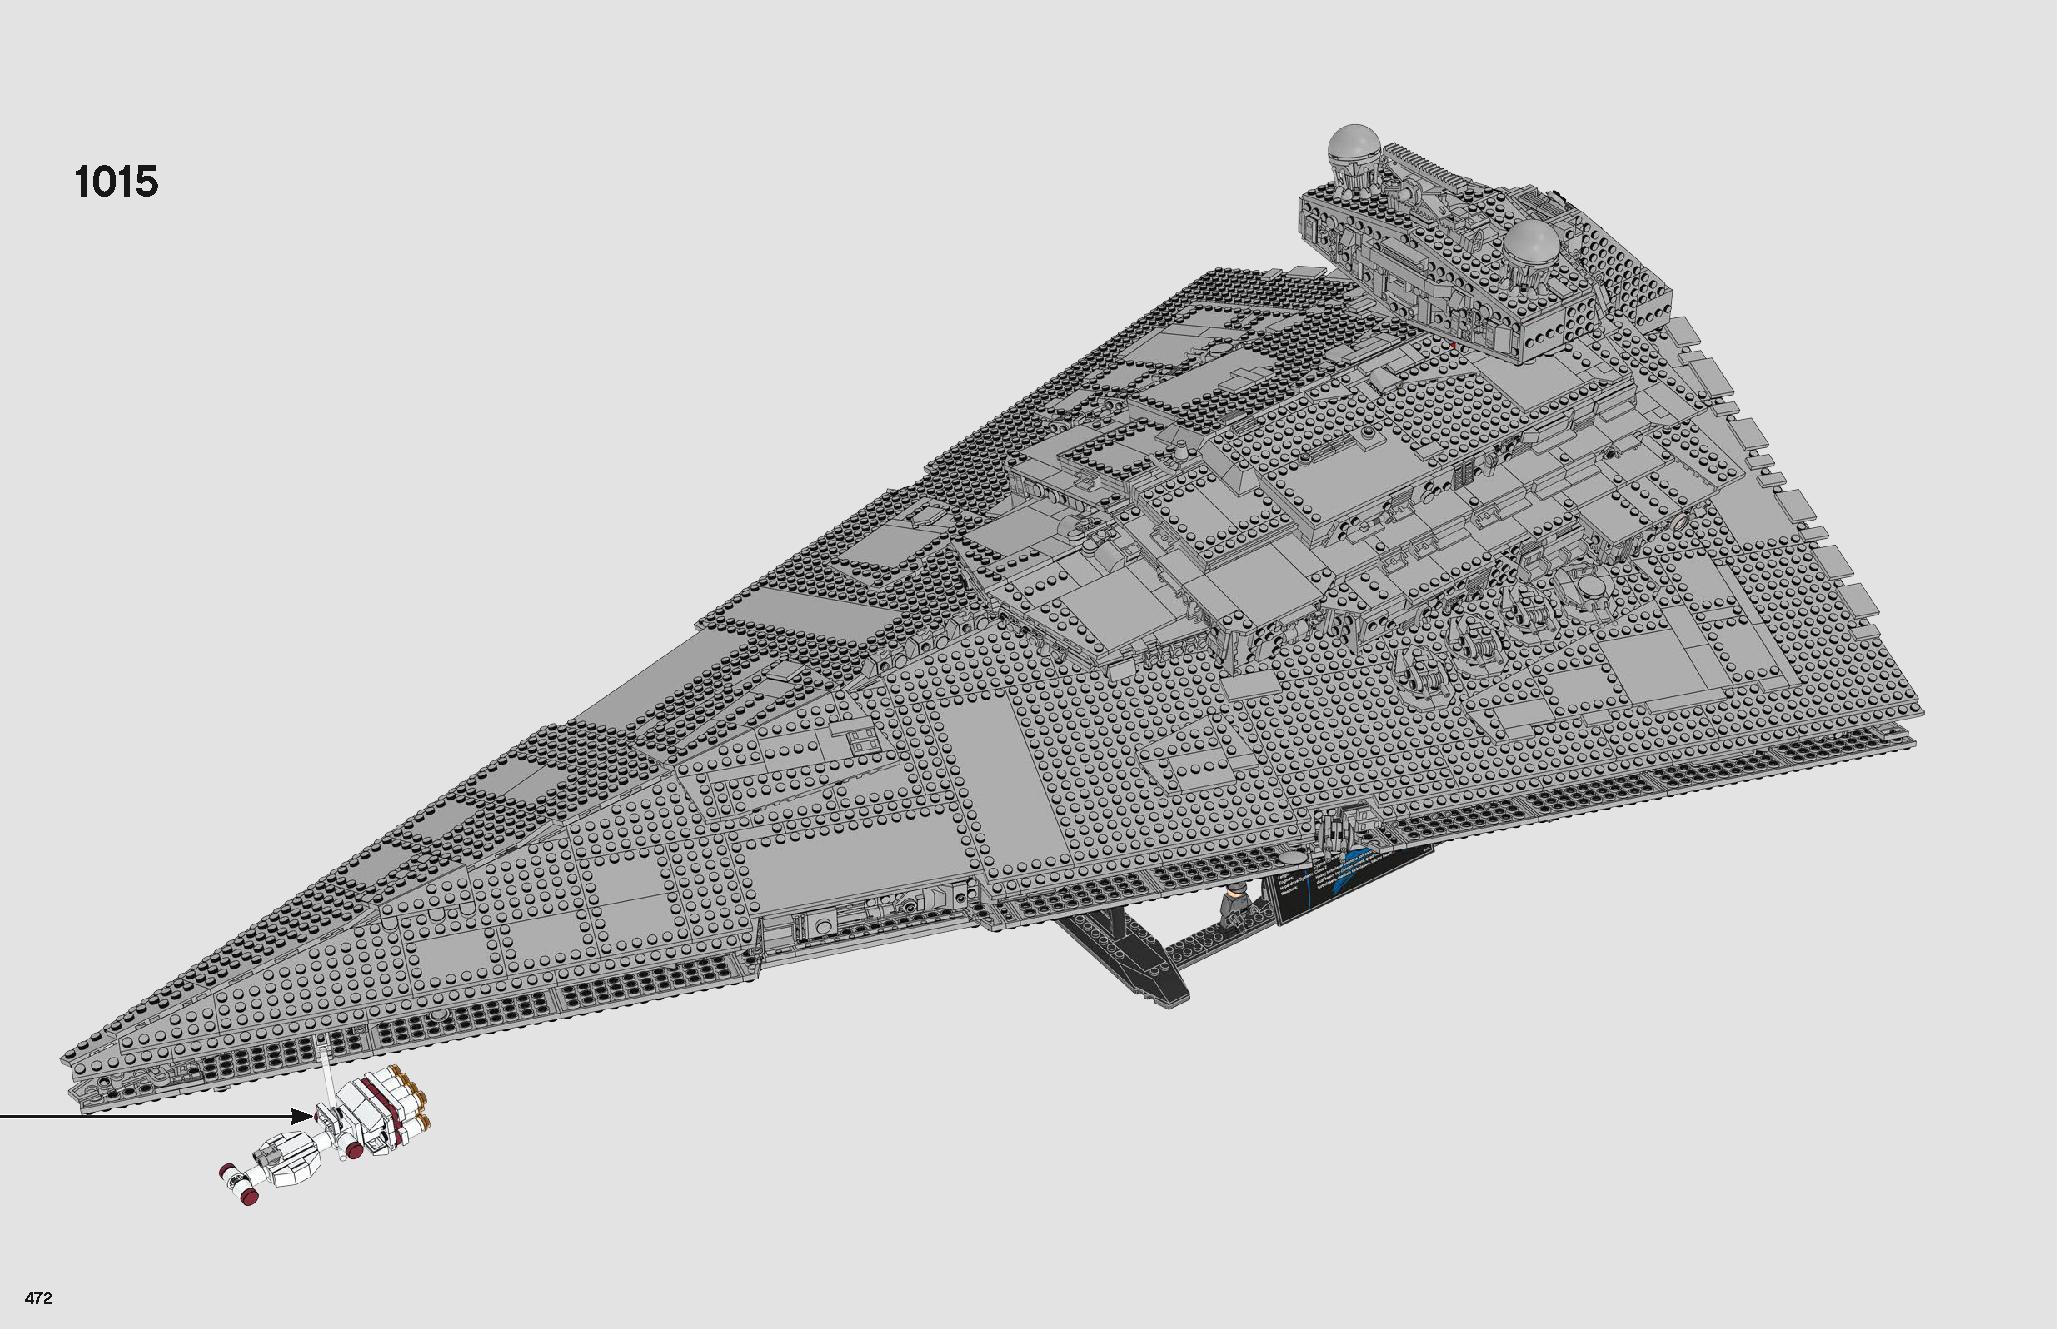 Imperial Star Destroyer 75252 LEGO information LEGO instructions 472 page